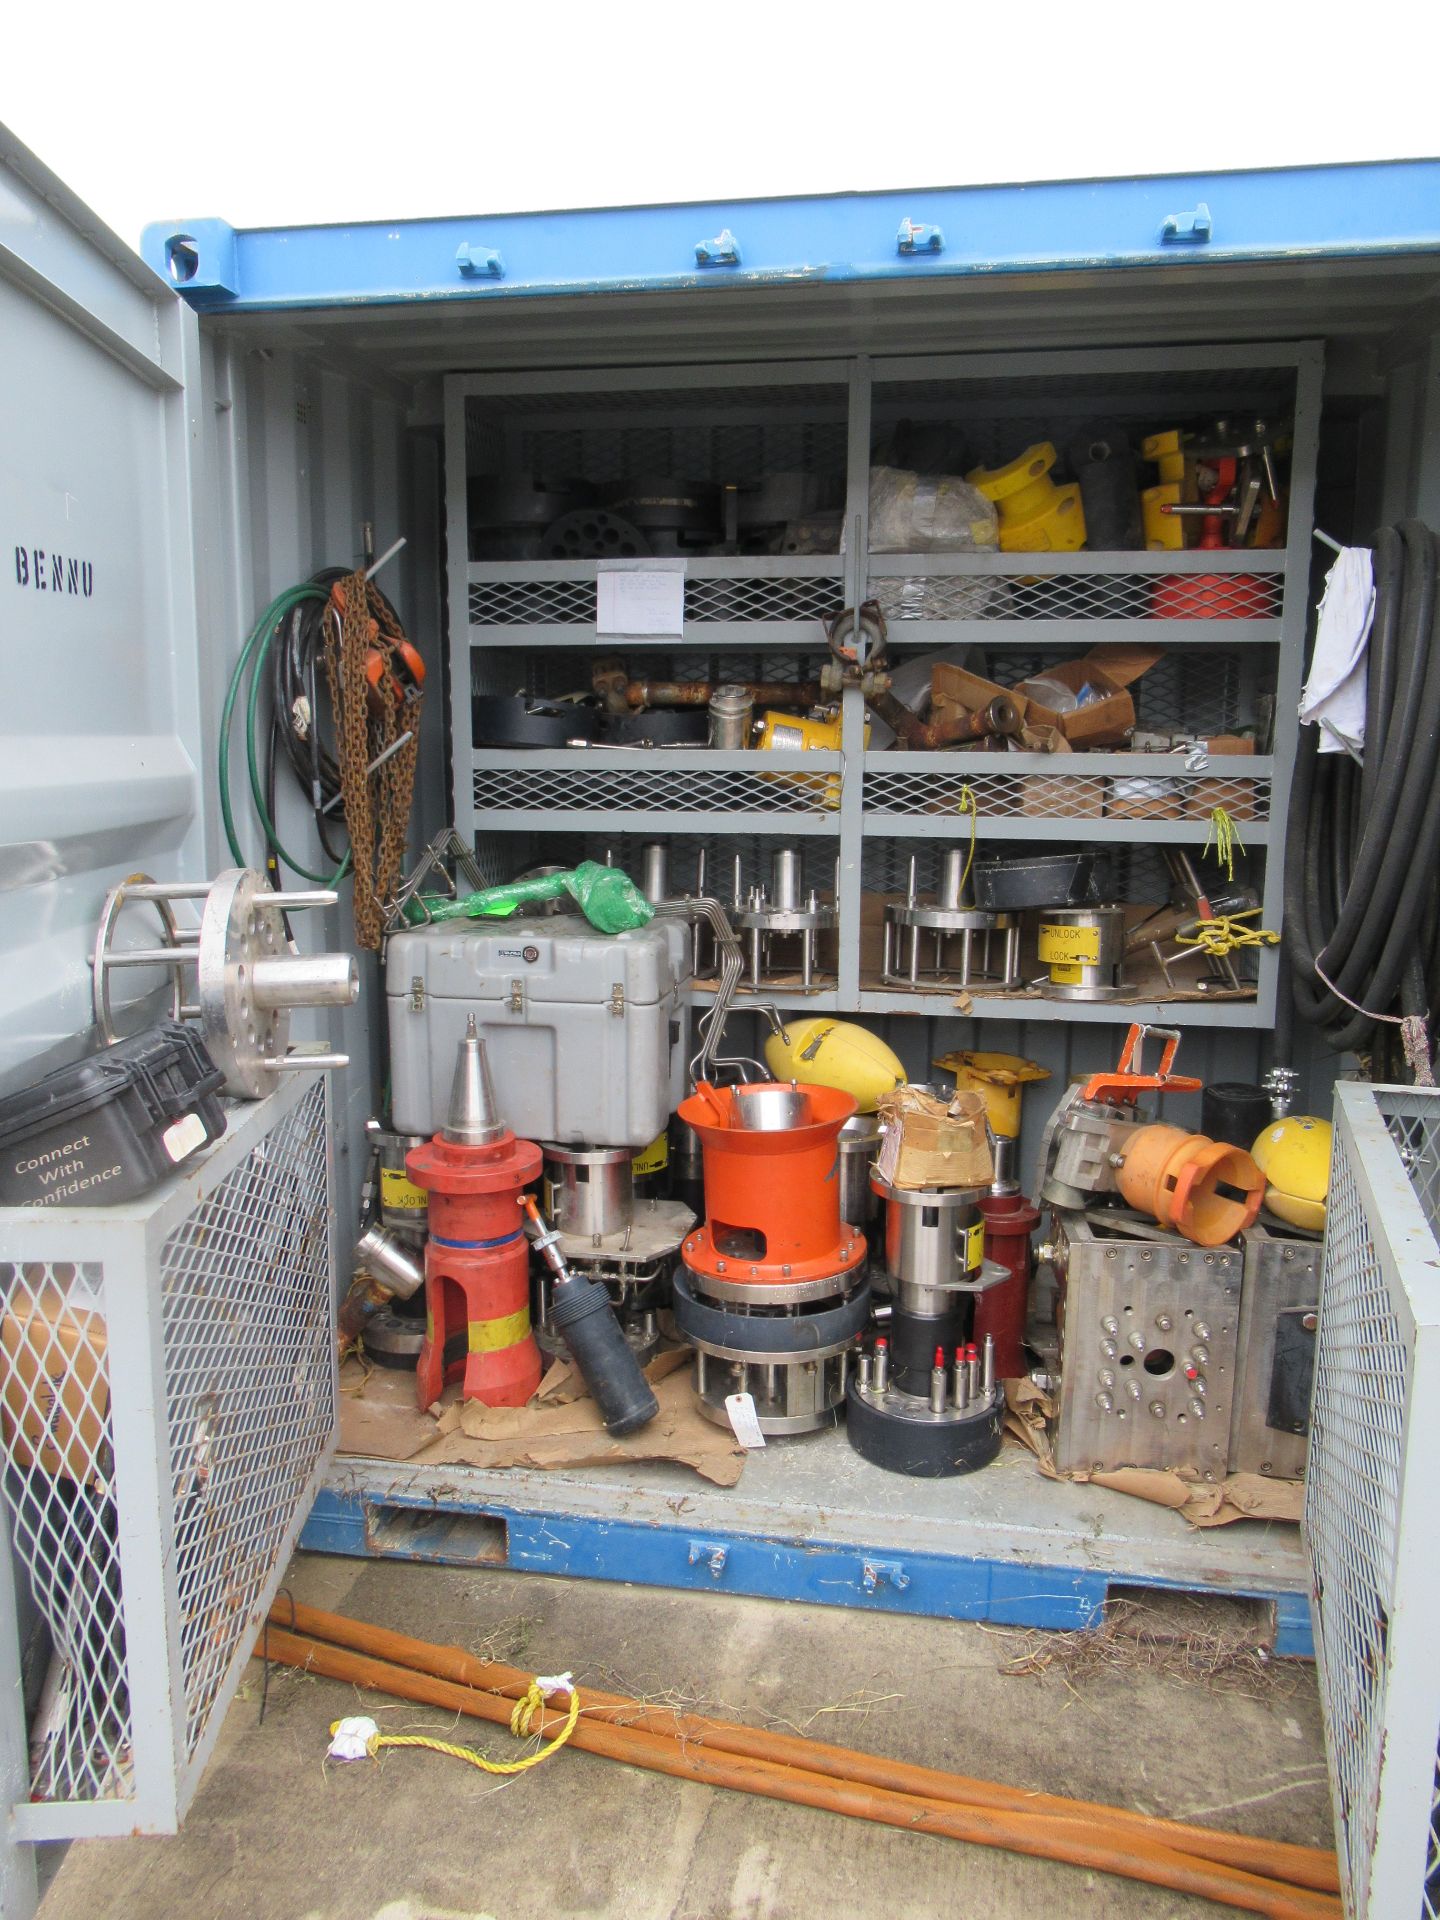 LOT CONSISTING OF 8’ X 4’ SEA CONTAINER AND CONTENTS, including subsea connectors and umbilical